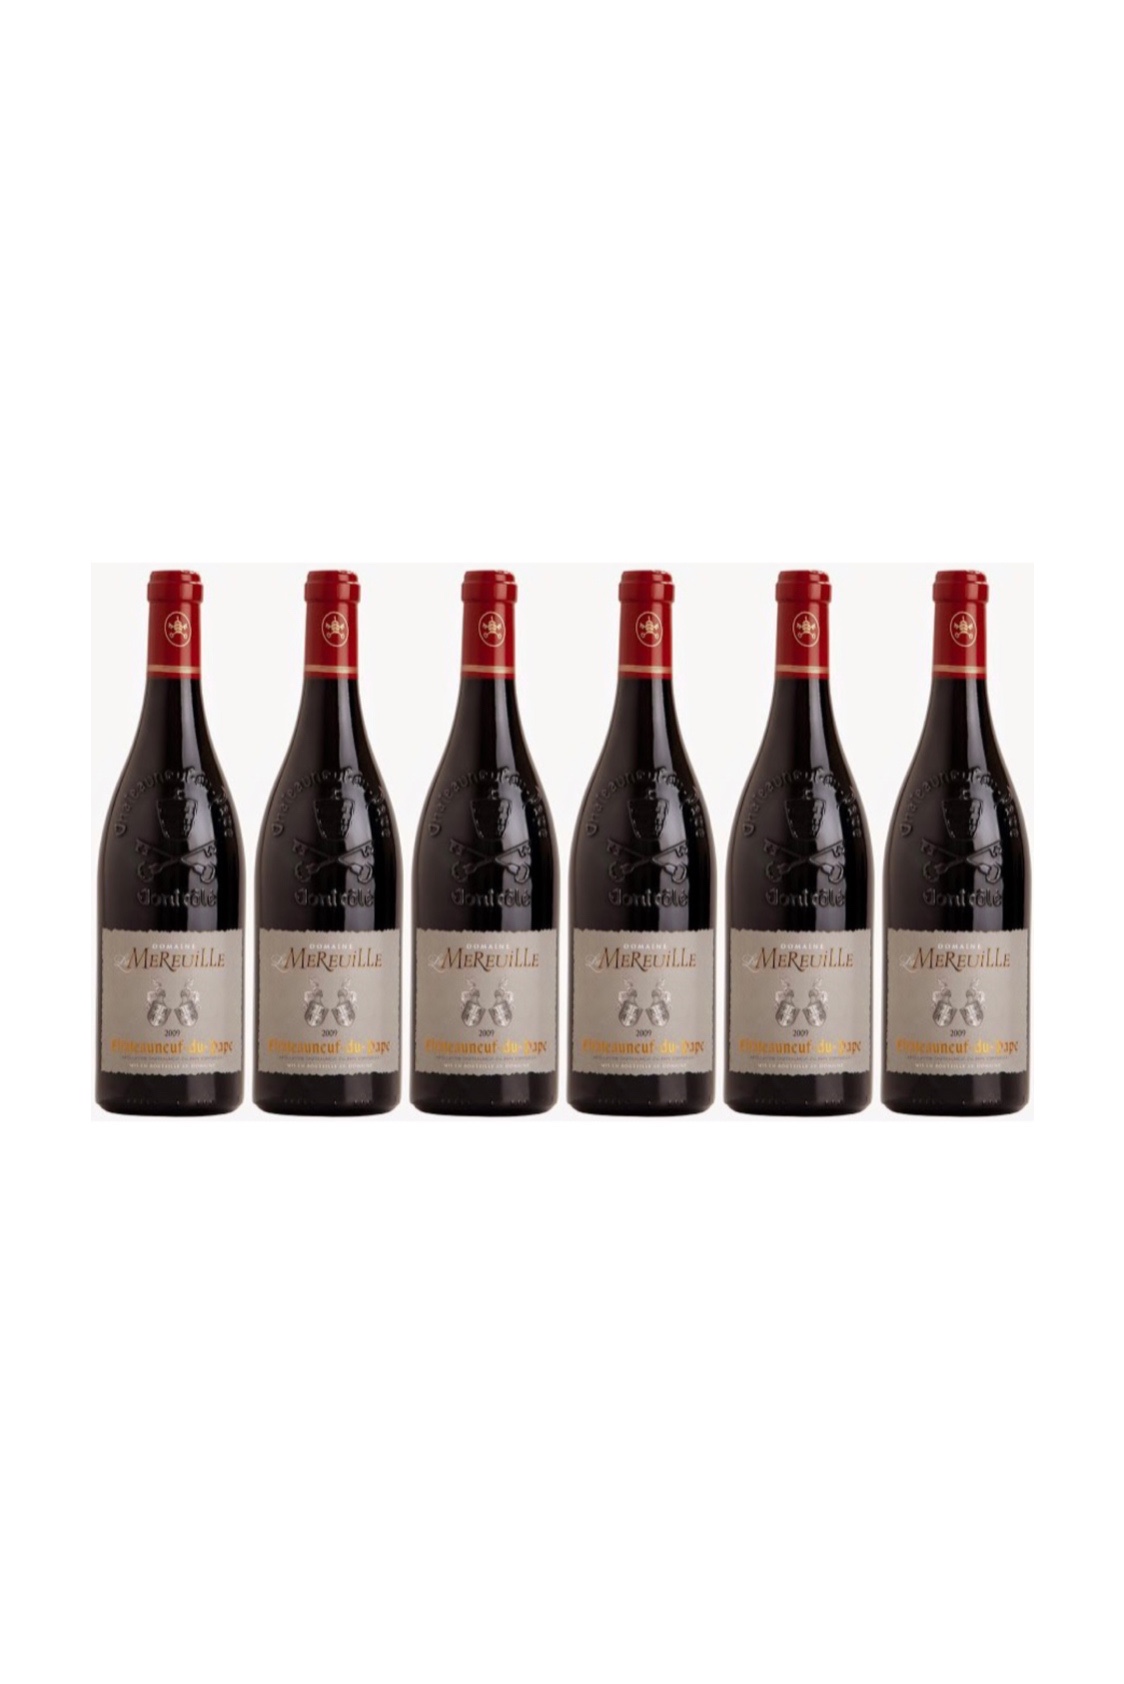 6 bottles of Chateauneuf du Pape 2015 at (27% off $588) and get a Free Set of 6 Wine Glass worth $90